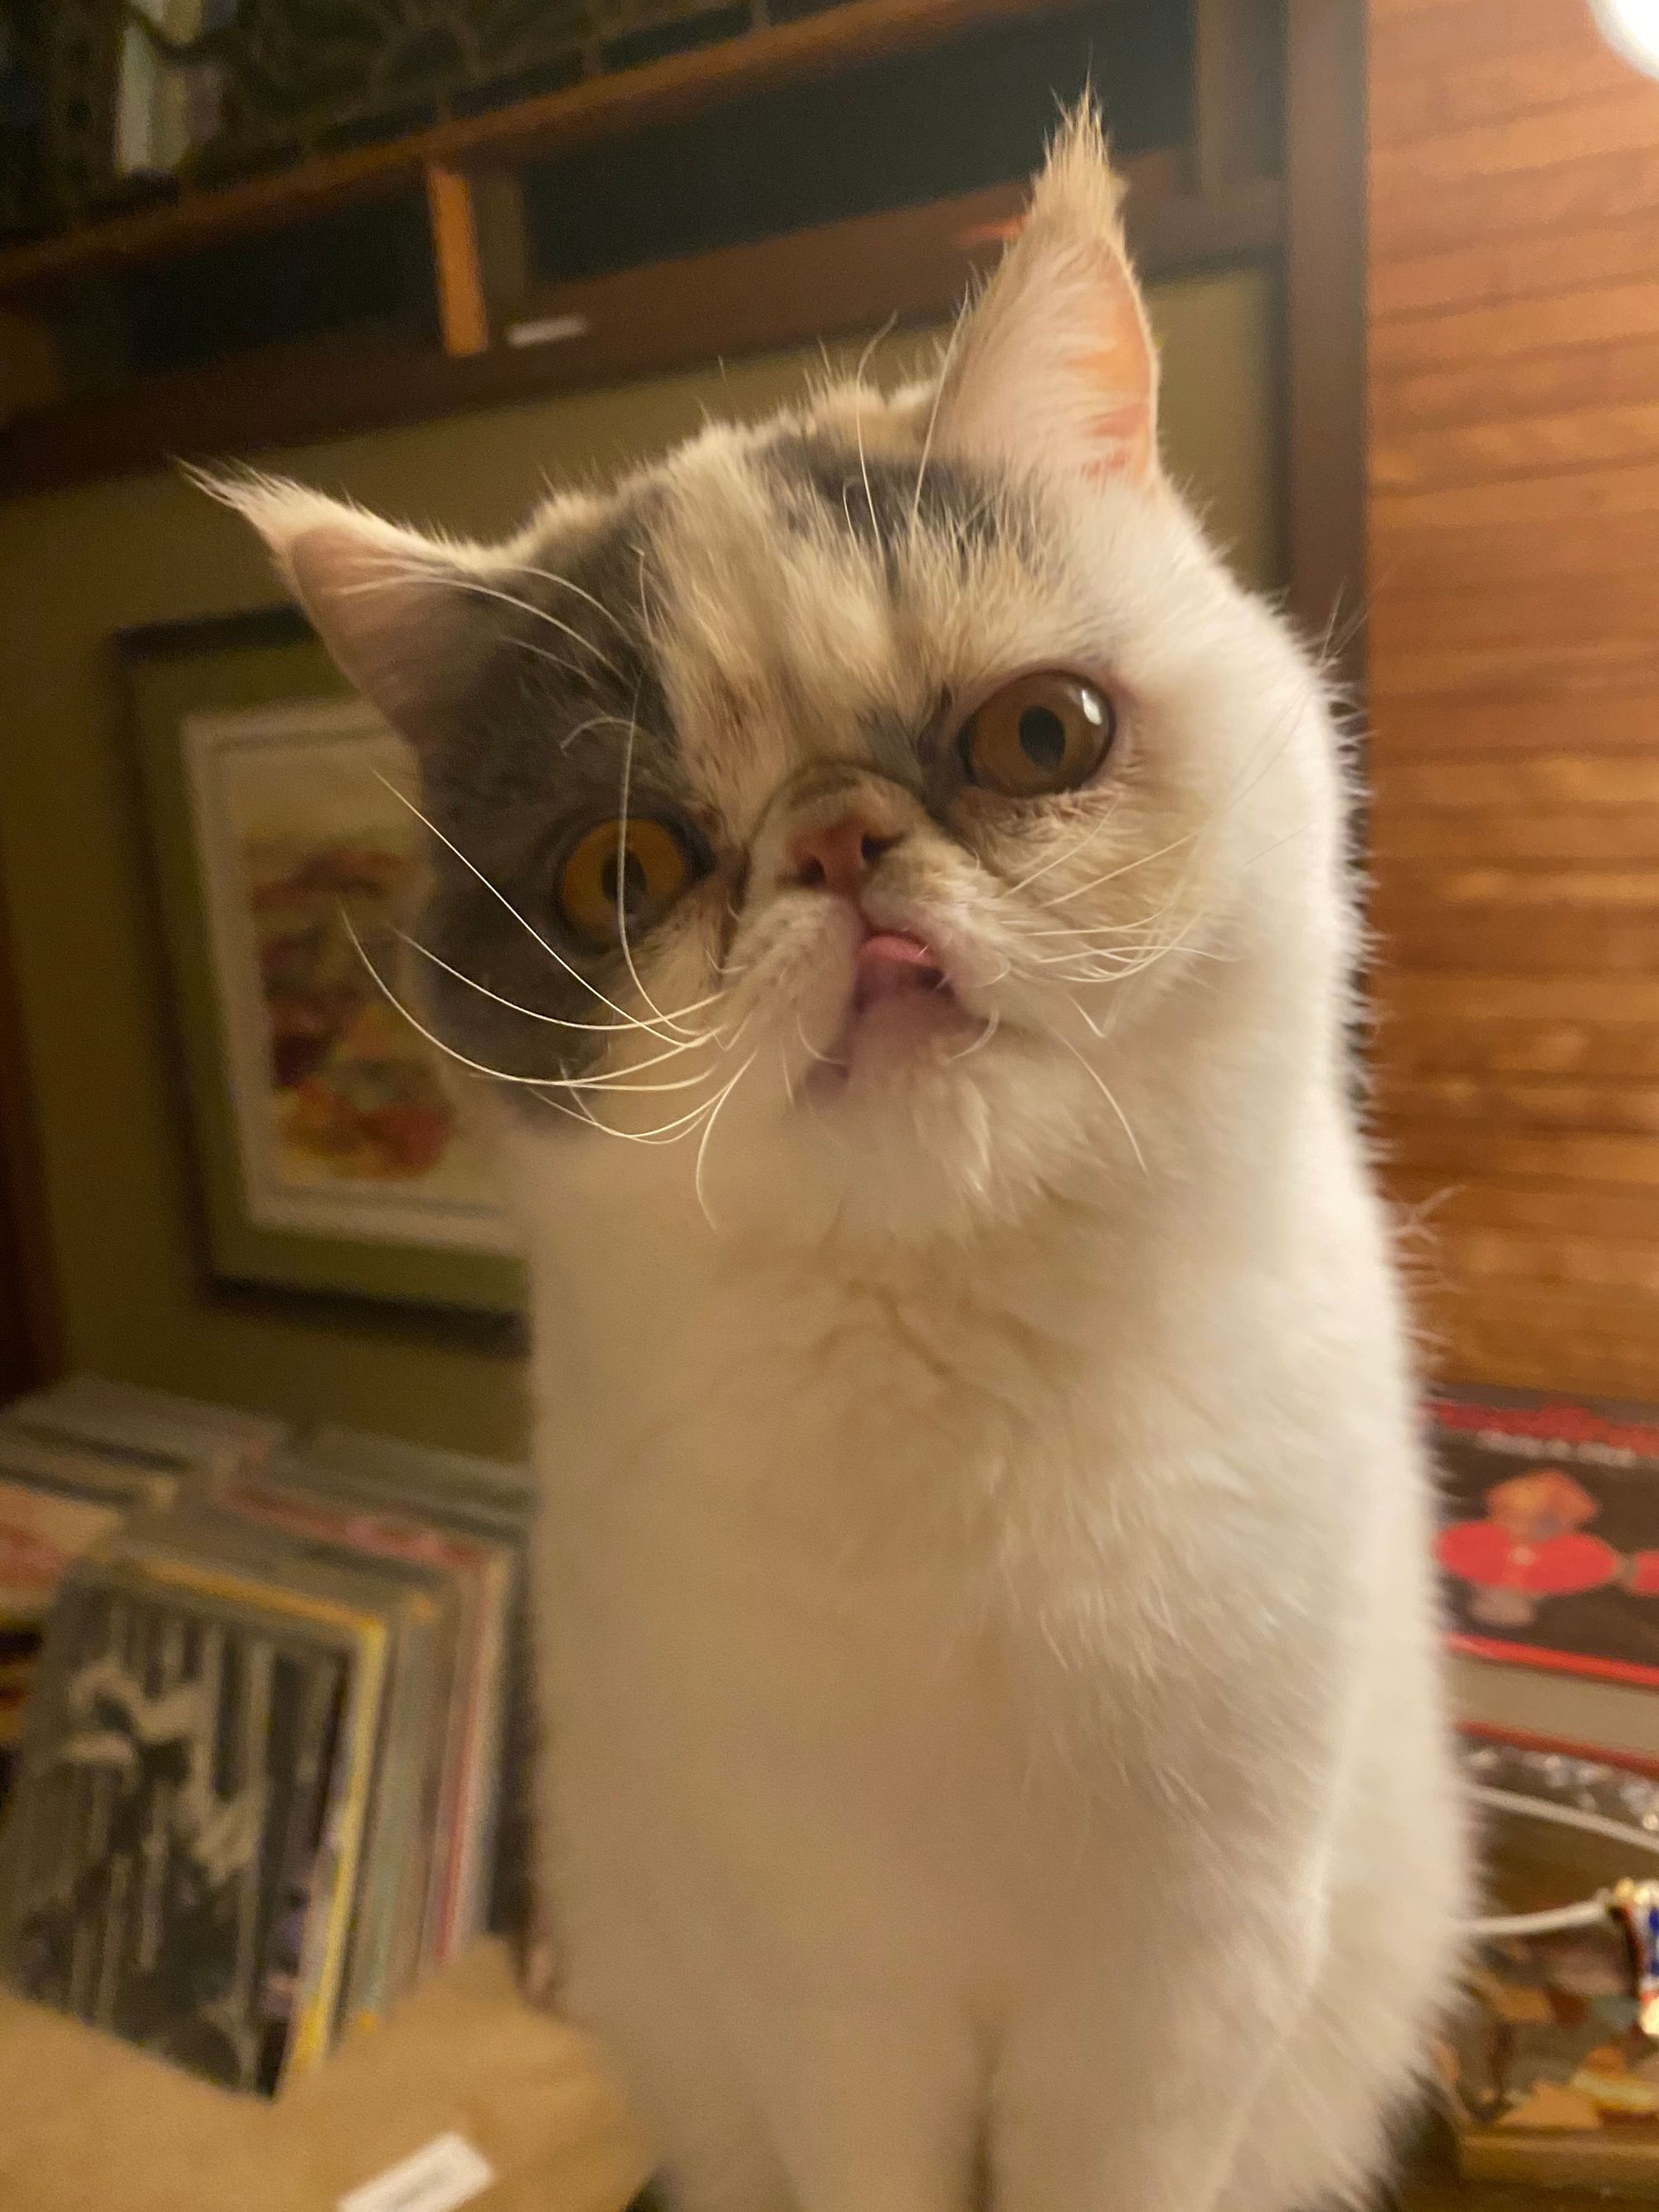 Close up shot of Flufflestiltskin the cat with her tongue out